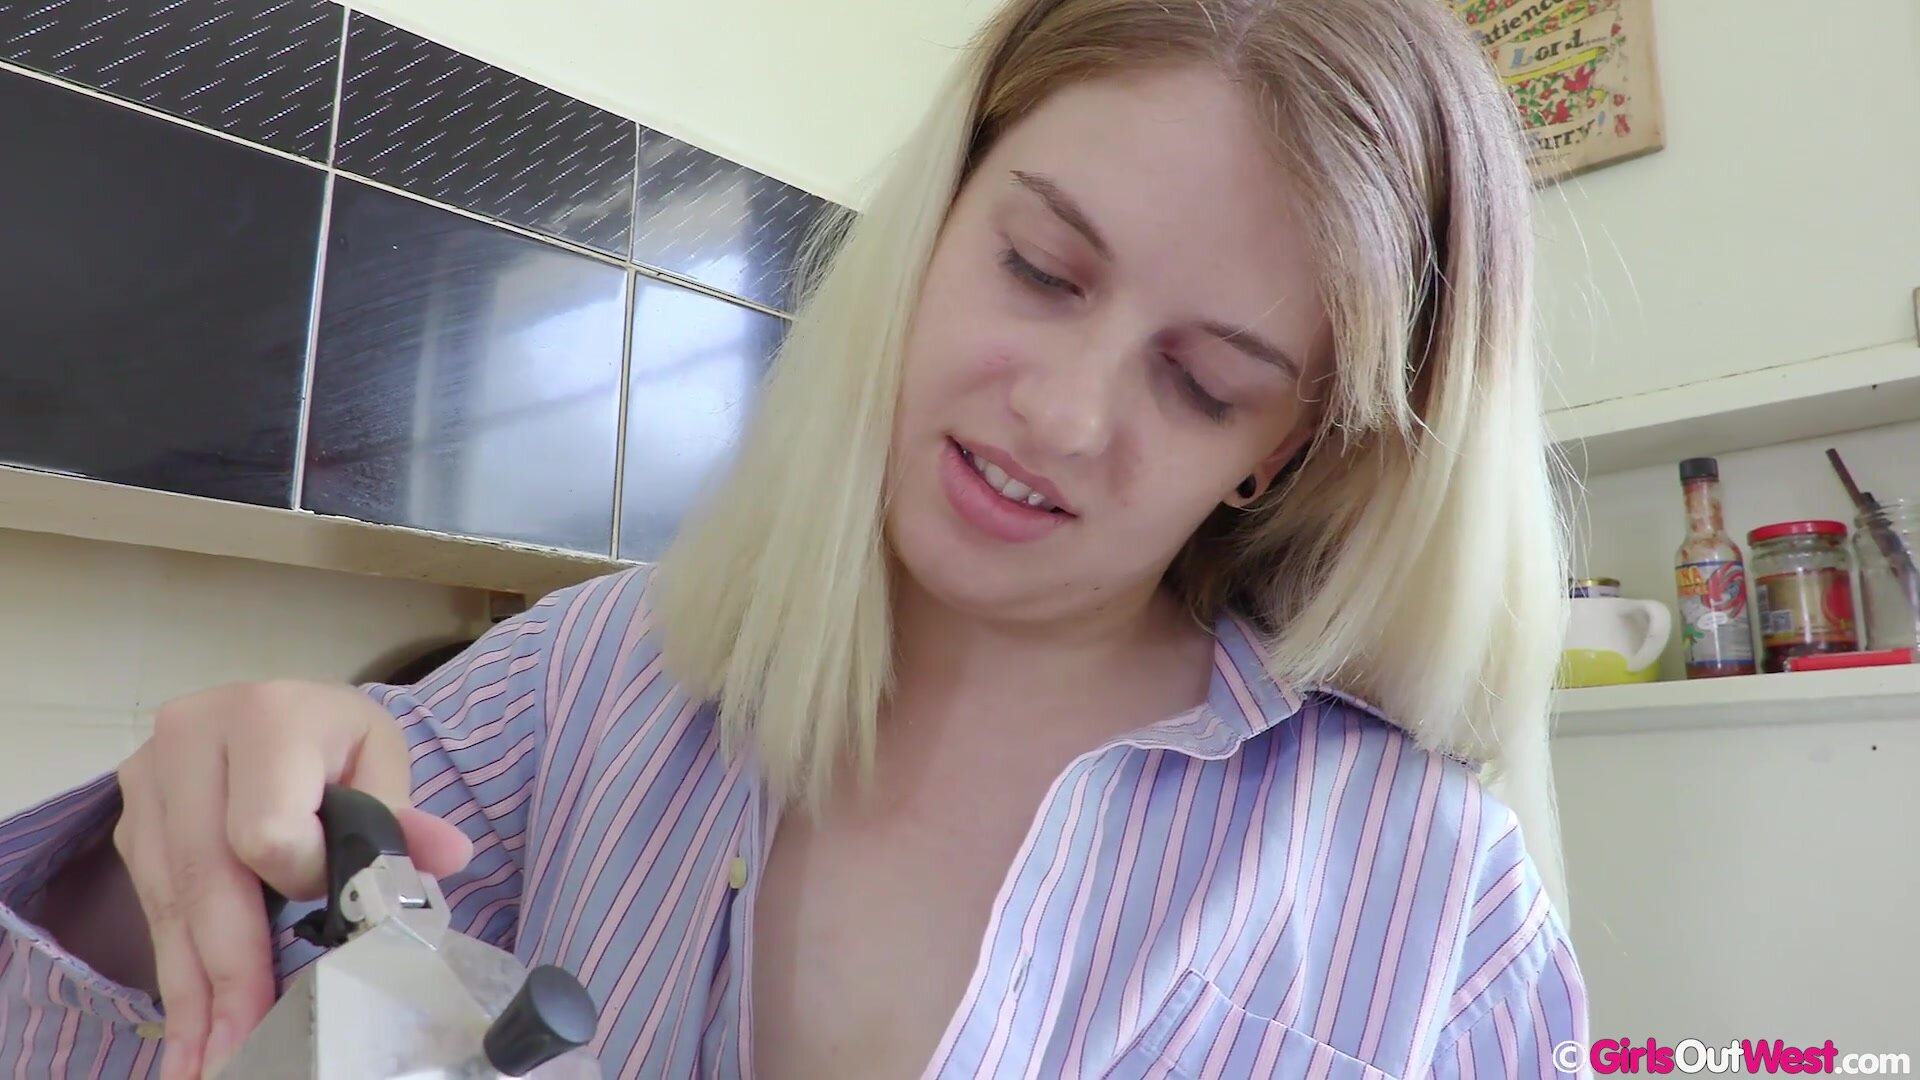 Girls Out West - Small titted blonde Katie Gee fingers her hairy pussy in the kitchen